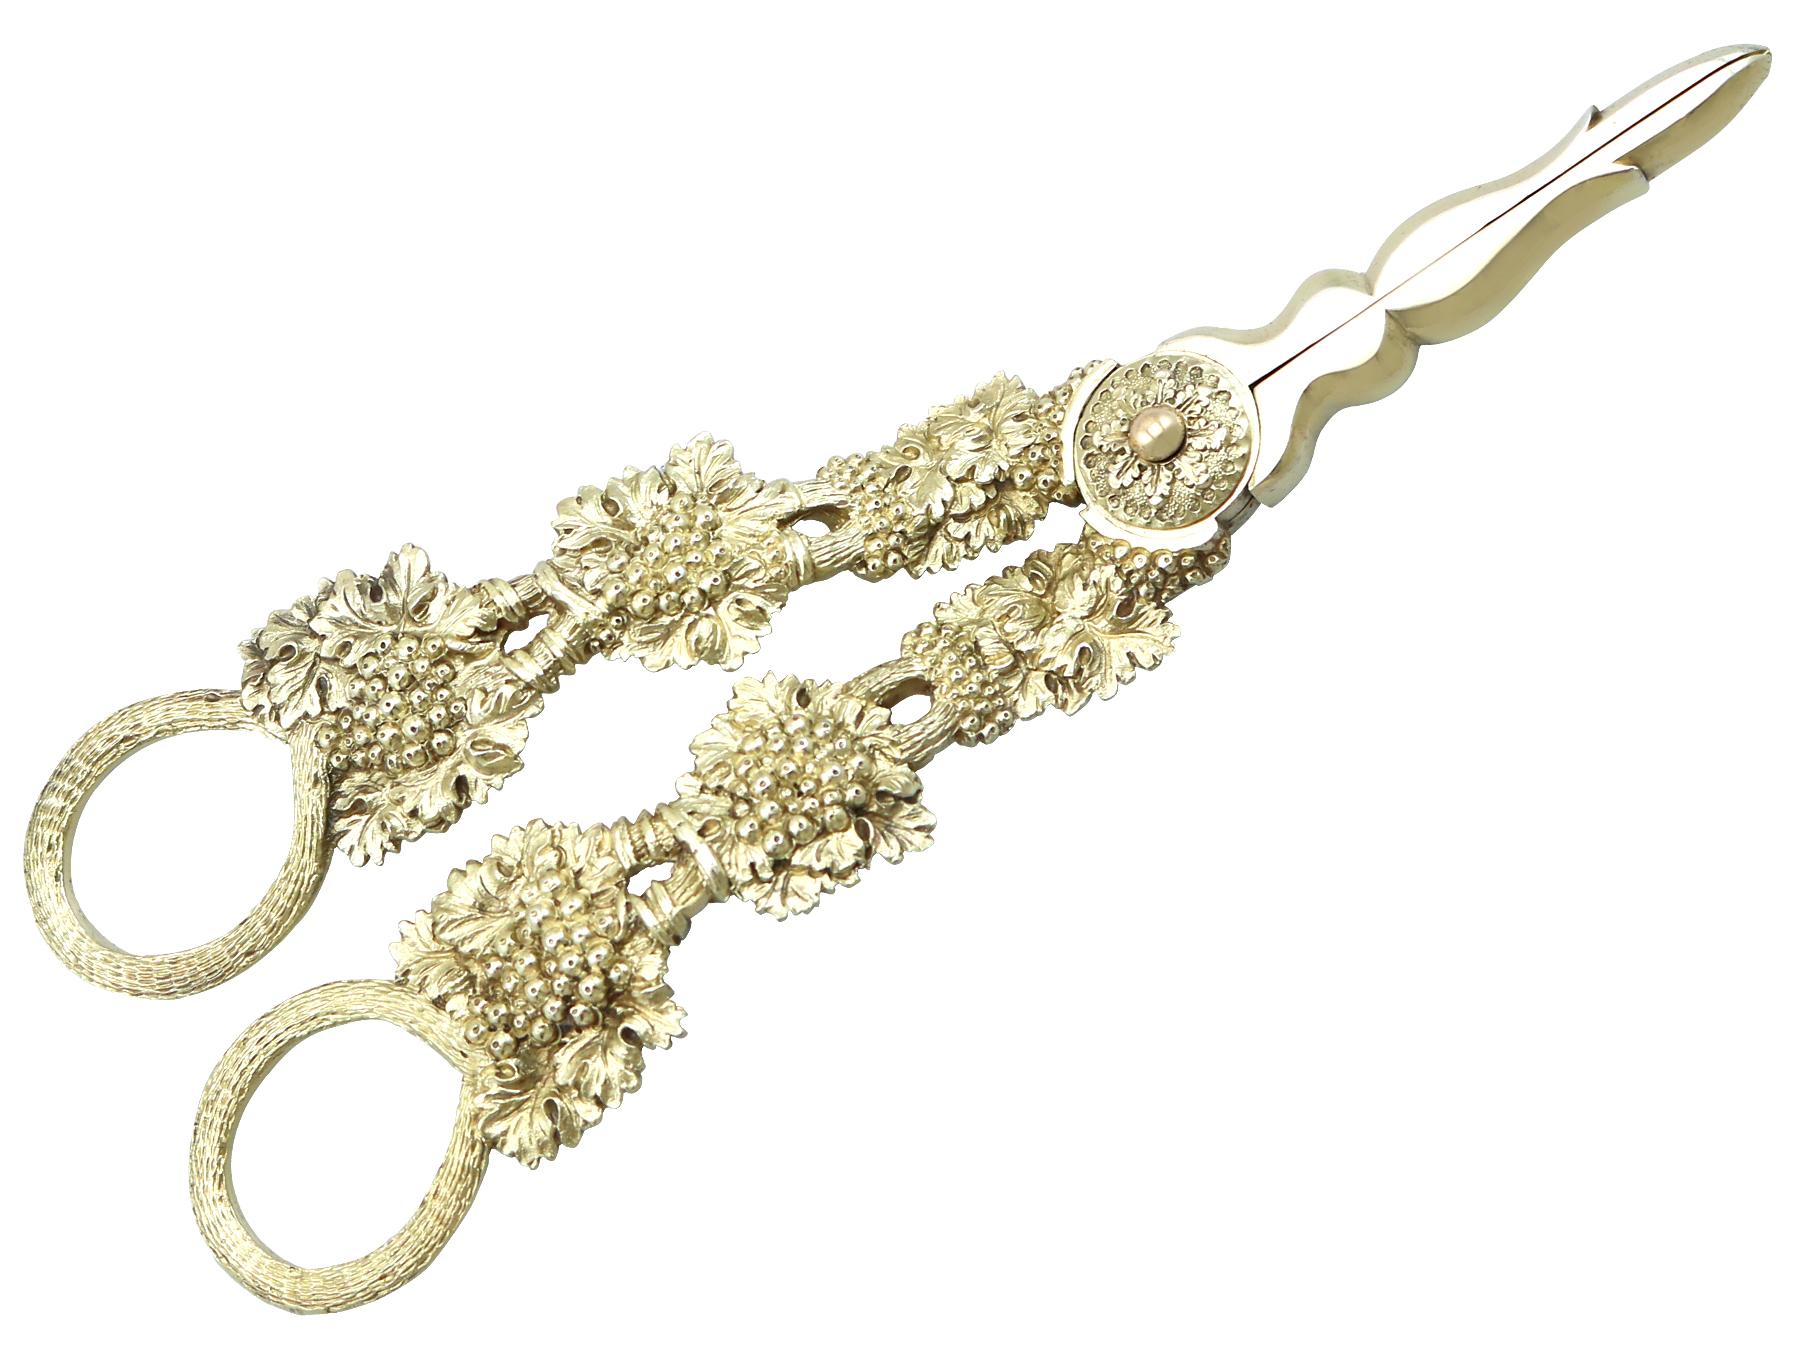 An exceptional, fine and impressive pair of antique George IV English sterling silver gilt grape shears - boxed; an addition to our silver flatware collection

This exceptional pair of antique sterling silver gilt grape shears has a hinged scissor